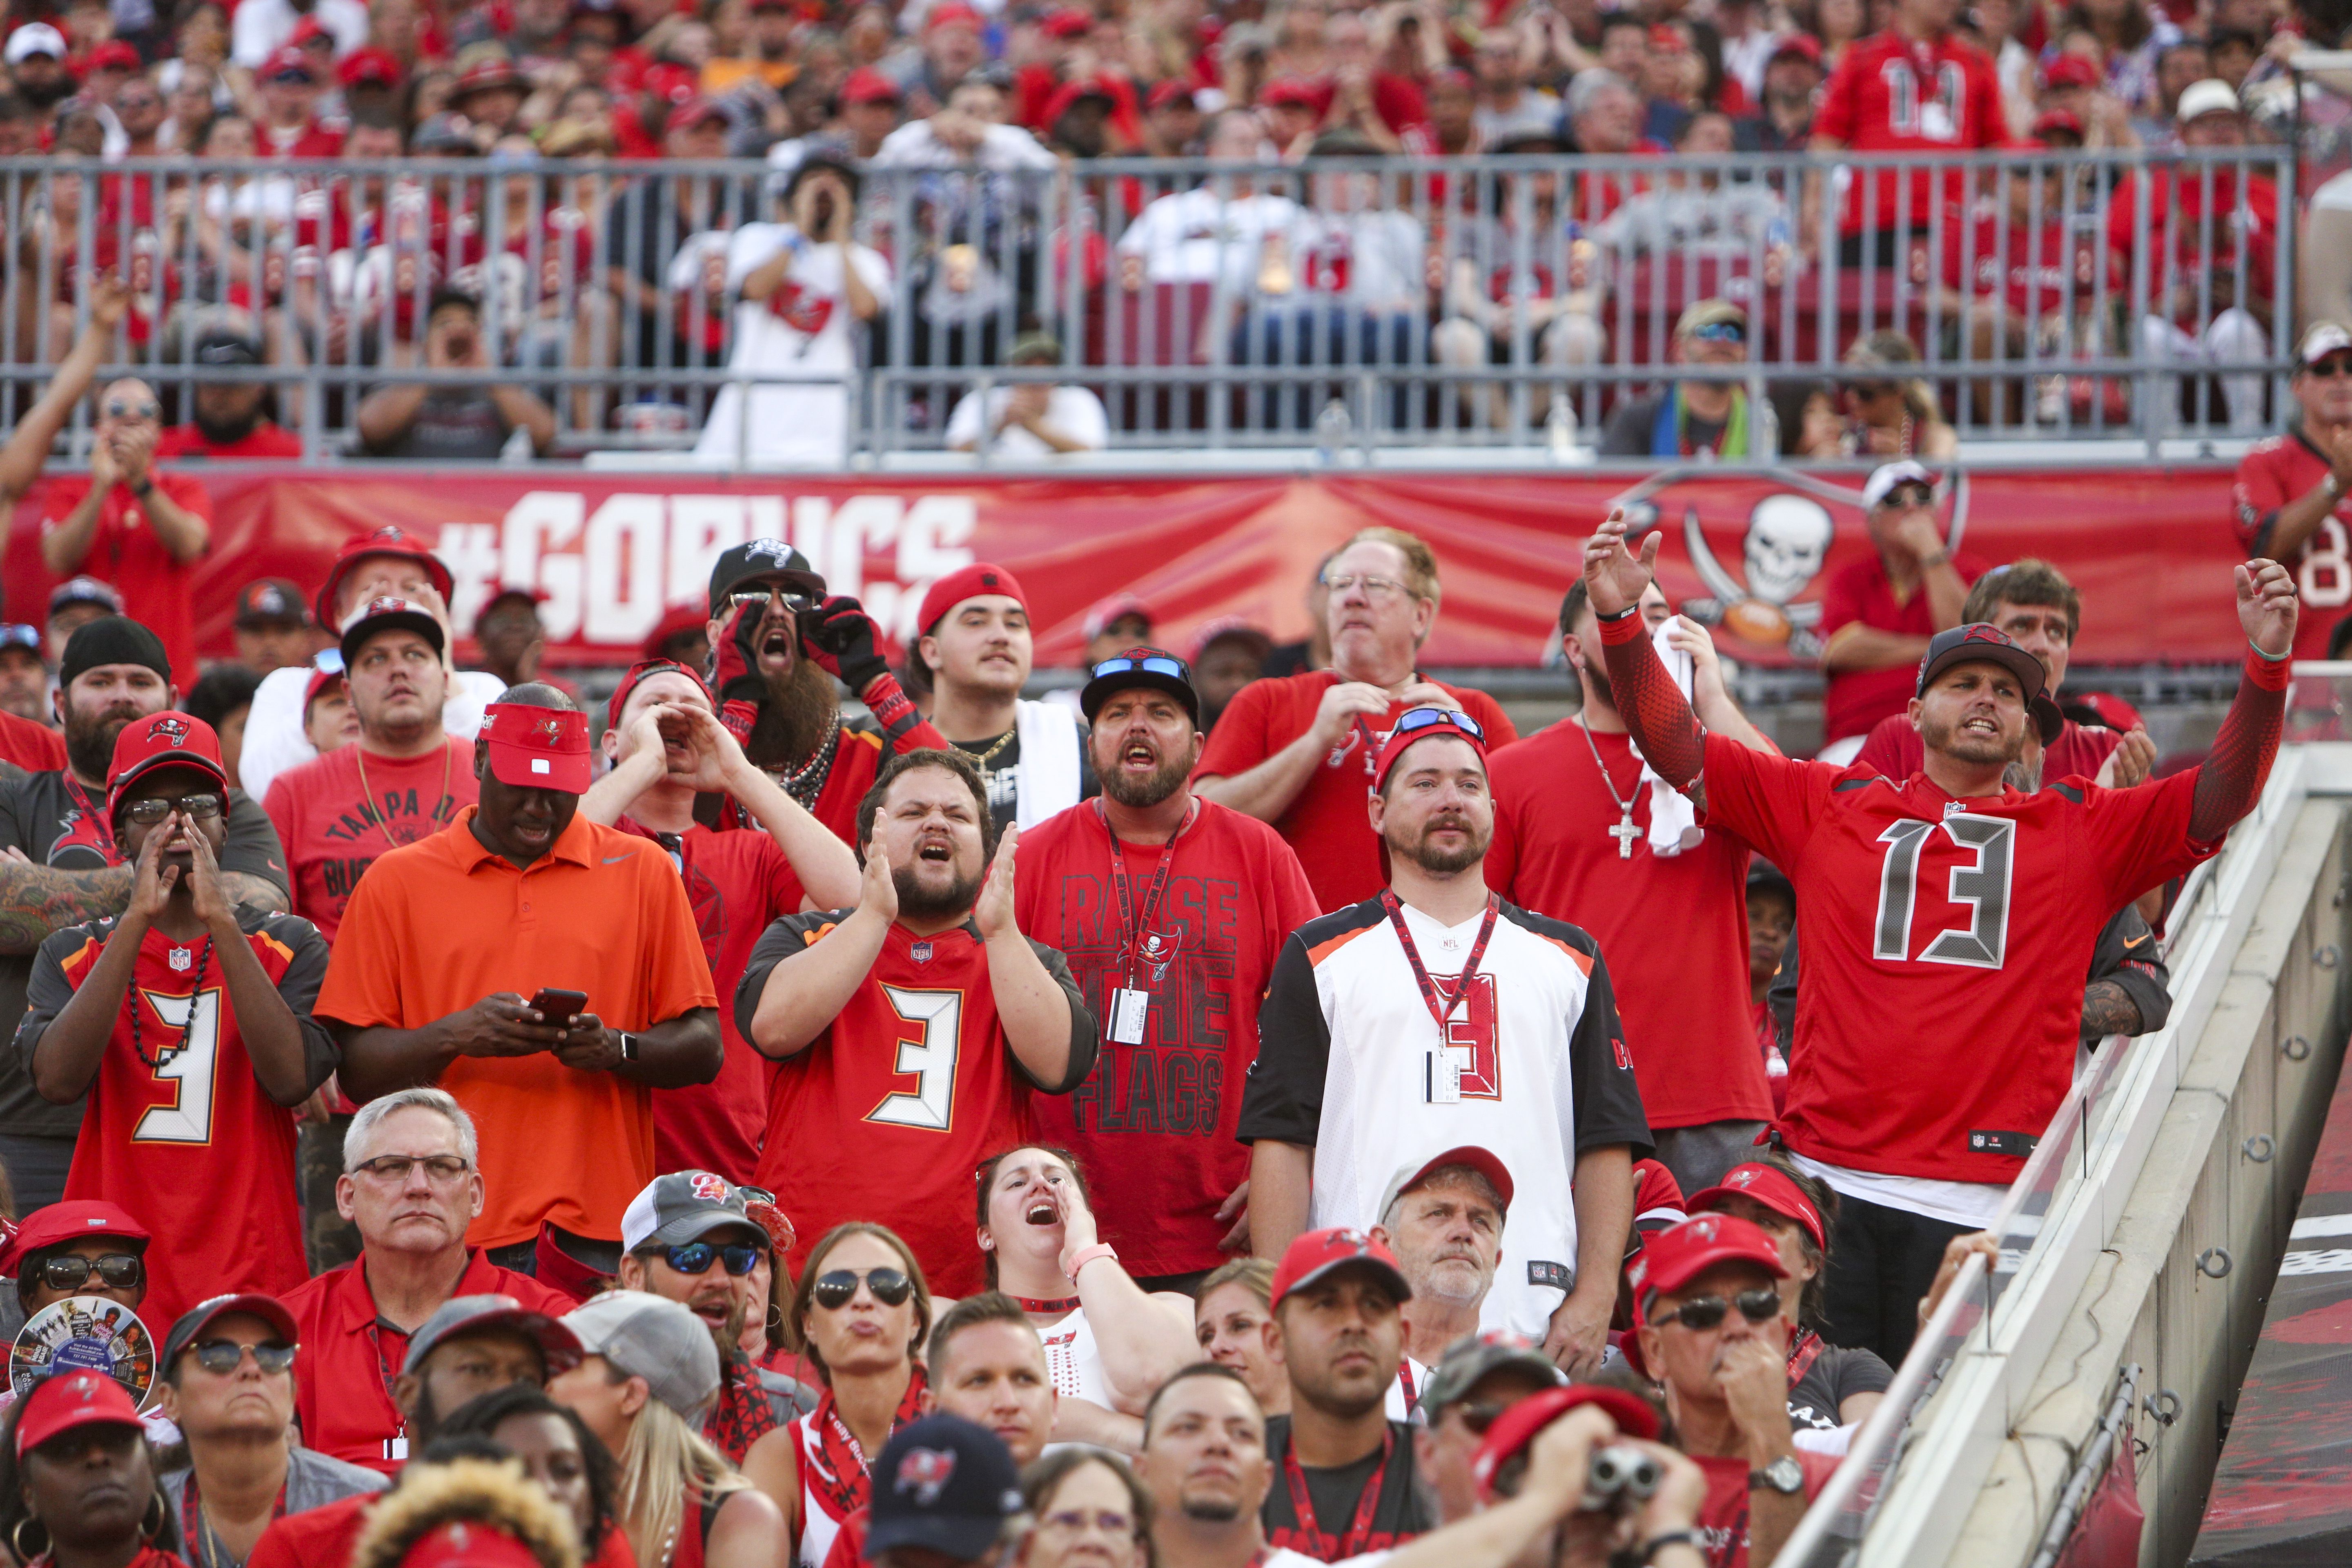 Bucs fans, getting an empty feeling at home games?